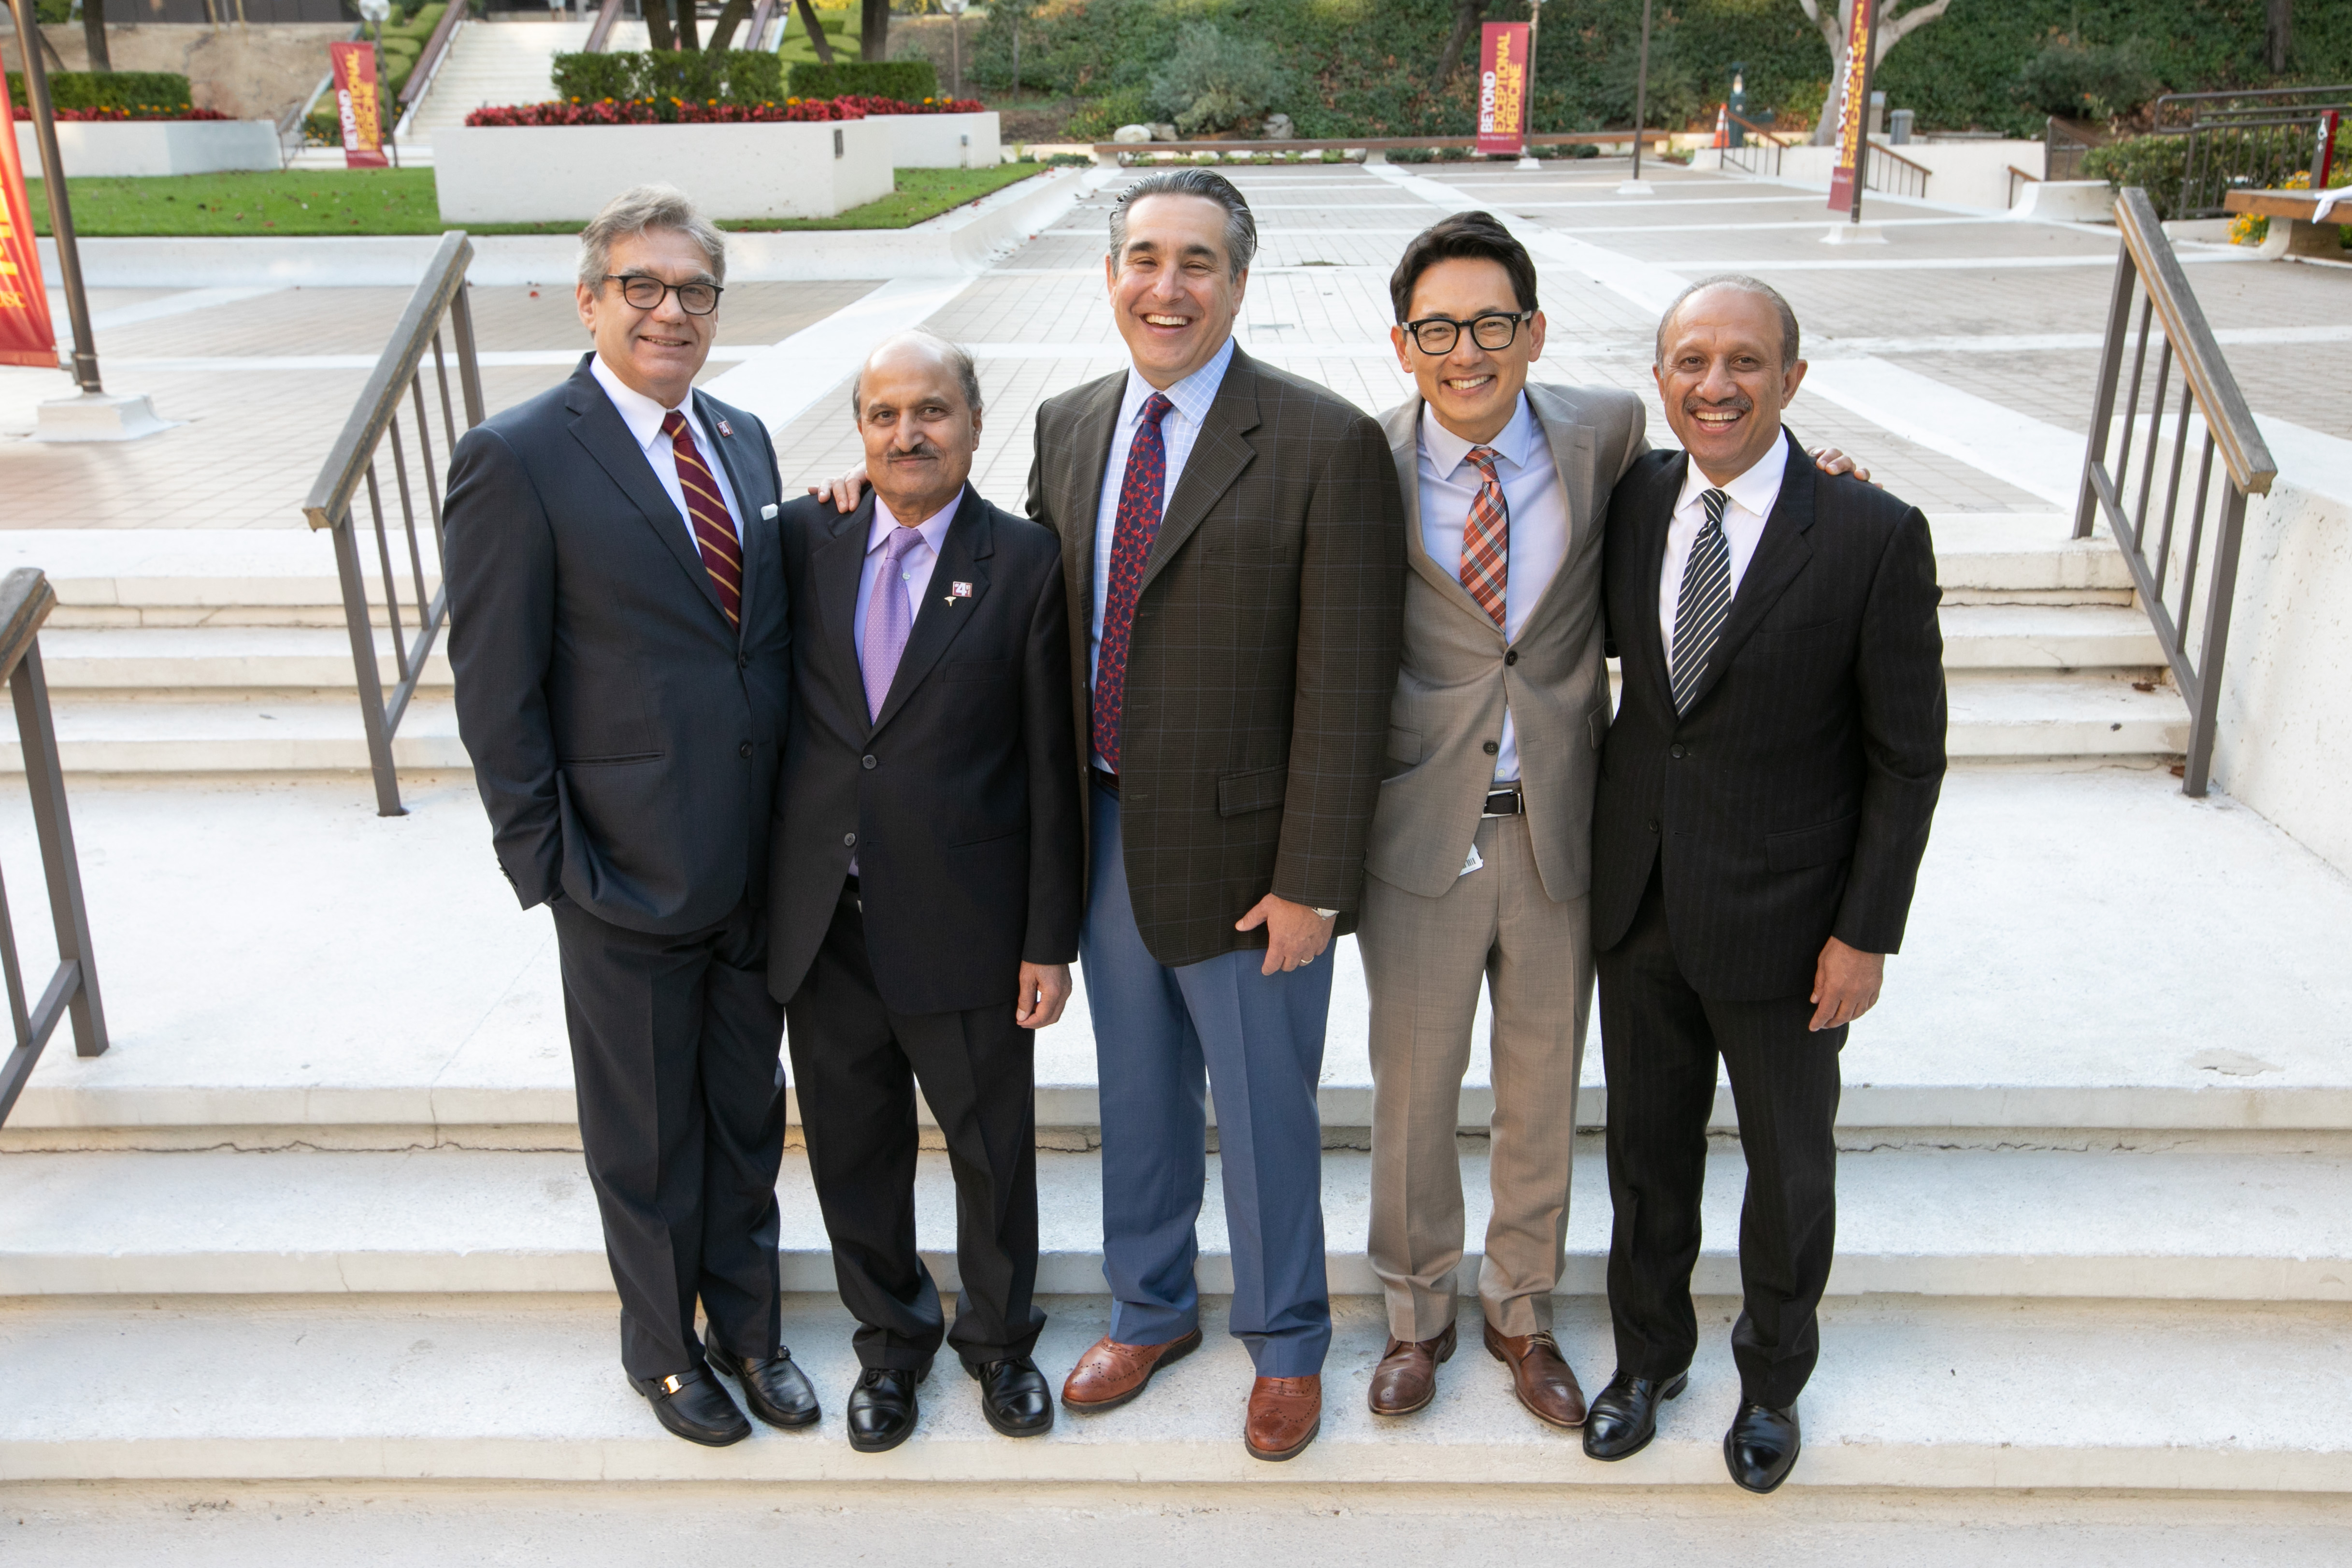 From left to right: Dr. Fuchs, Dr. Bhardwaj, Dr. Ginsberg, Dr. Gill, and Dr. Park